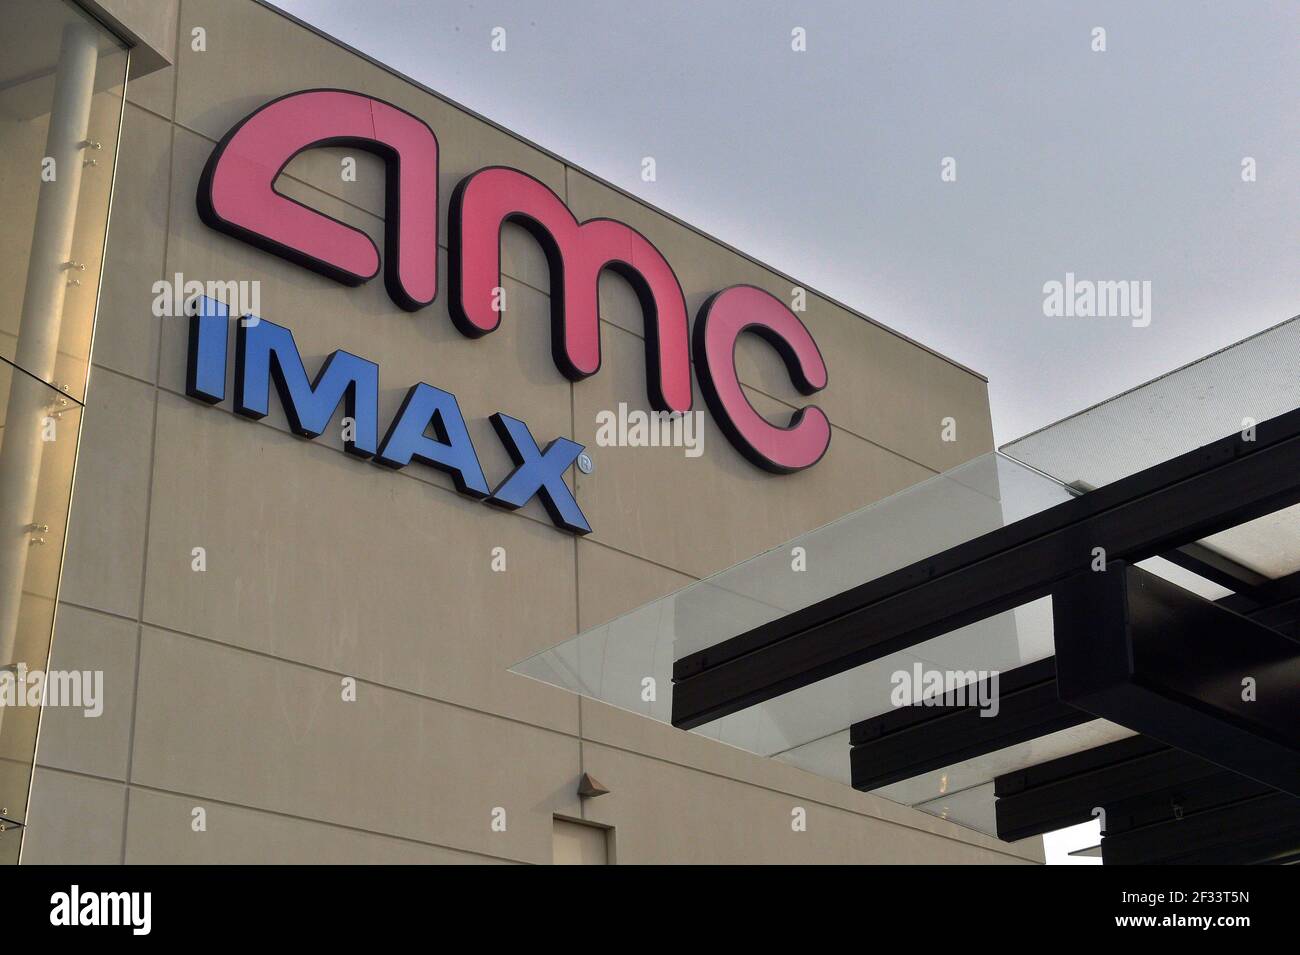 Los Angeles, United States. 15th Mar, 2021. An AMC theater is seen at the Westfield Century City mall lin Los Angeles on Sunday, March 14, 2021. AMC Theatres, one of the largest movie chains in the United States, will reopen two of its flagship locations in the Los Angeles market; the Burbank 16 and Century City 15 multiplexes today. Moviegoers in the entertainment and film capital of the world can finally watch films in theaters again after nearly a year of closures and restrictions brought on by the coronavirus pandemic. Photo by Jim Ruymen/UPI Credit: UPI/Alamy Live News Stock Photo